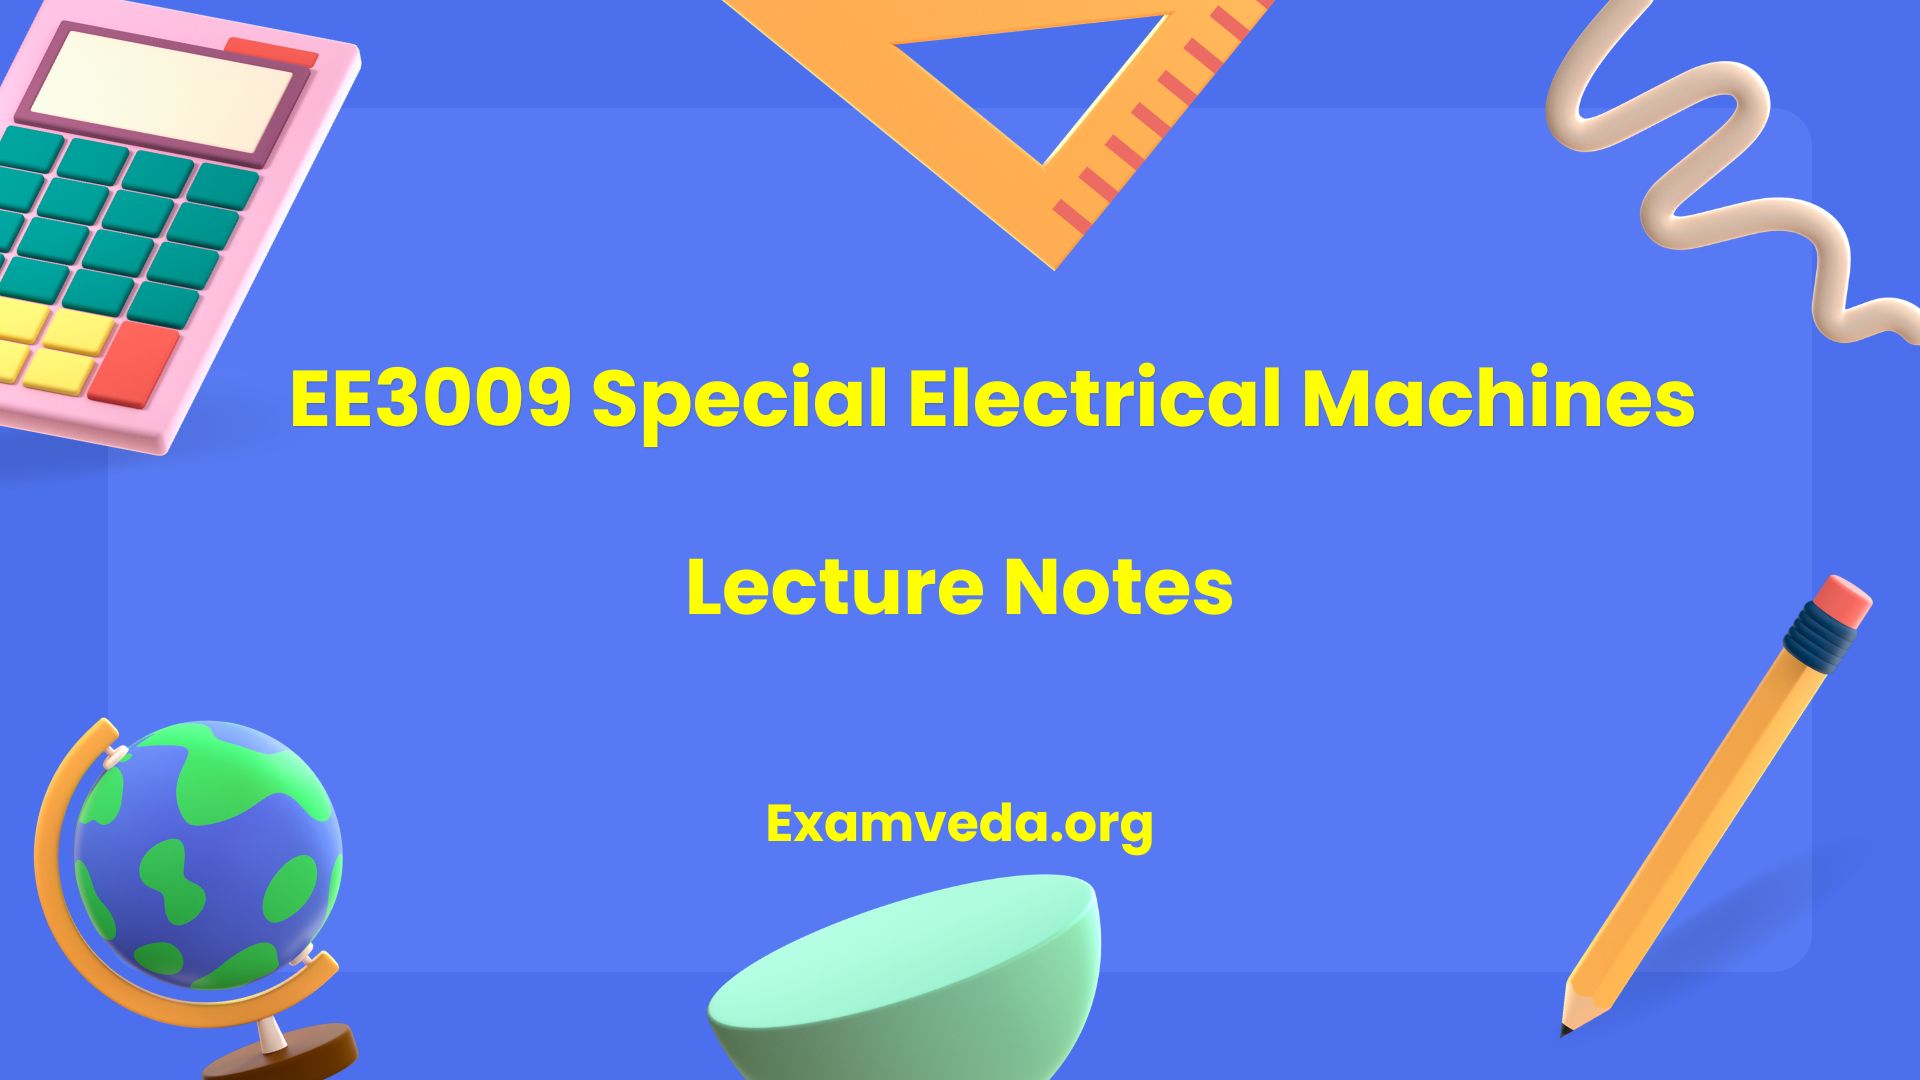 EE3009 Special Electrical Machines Lecture Notes